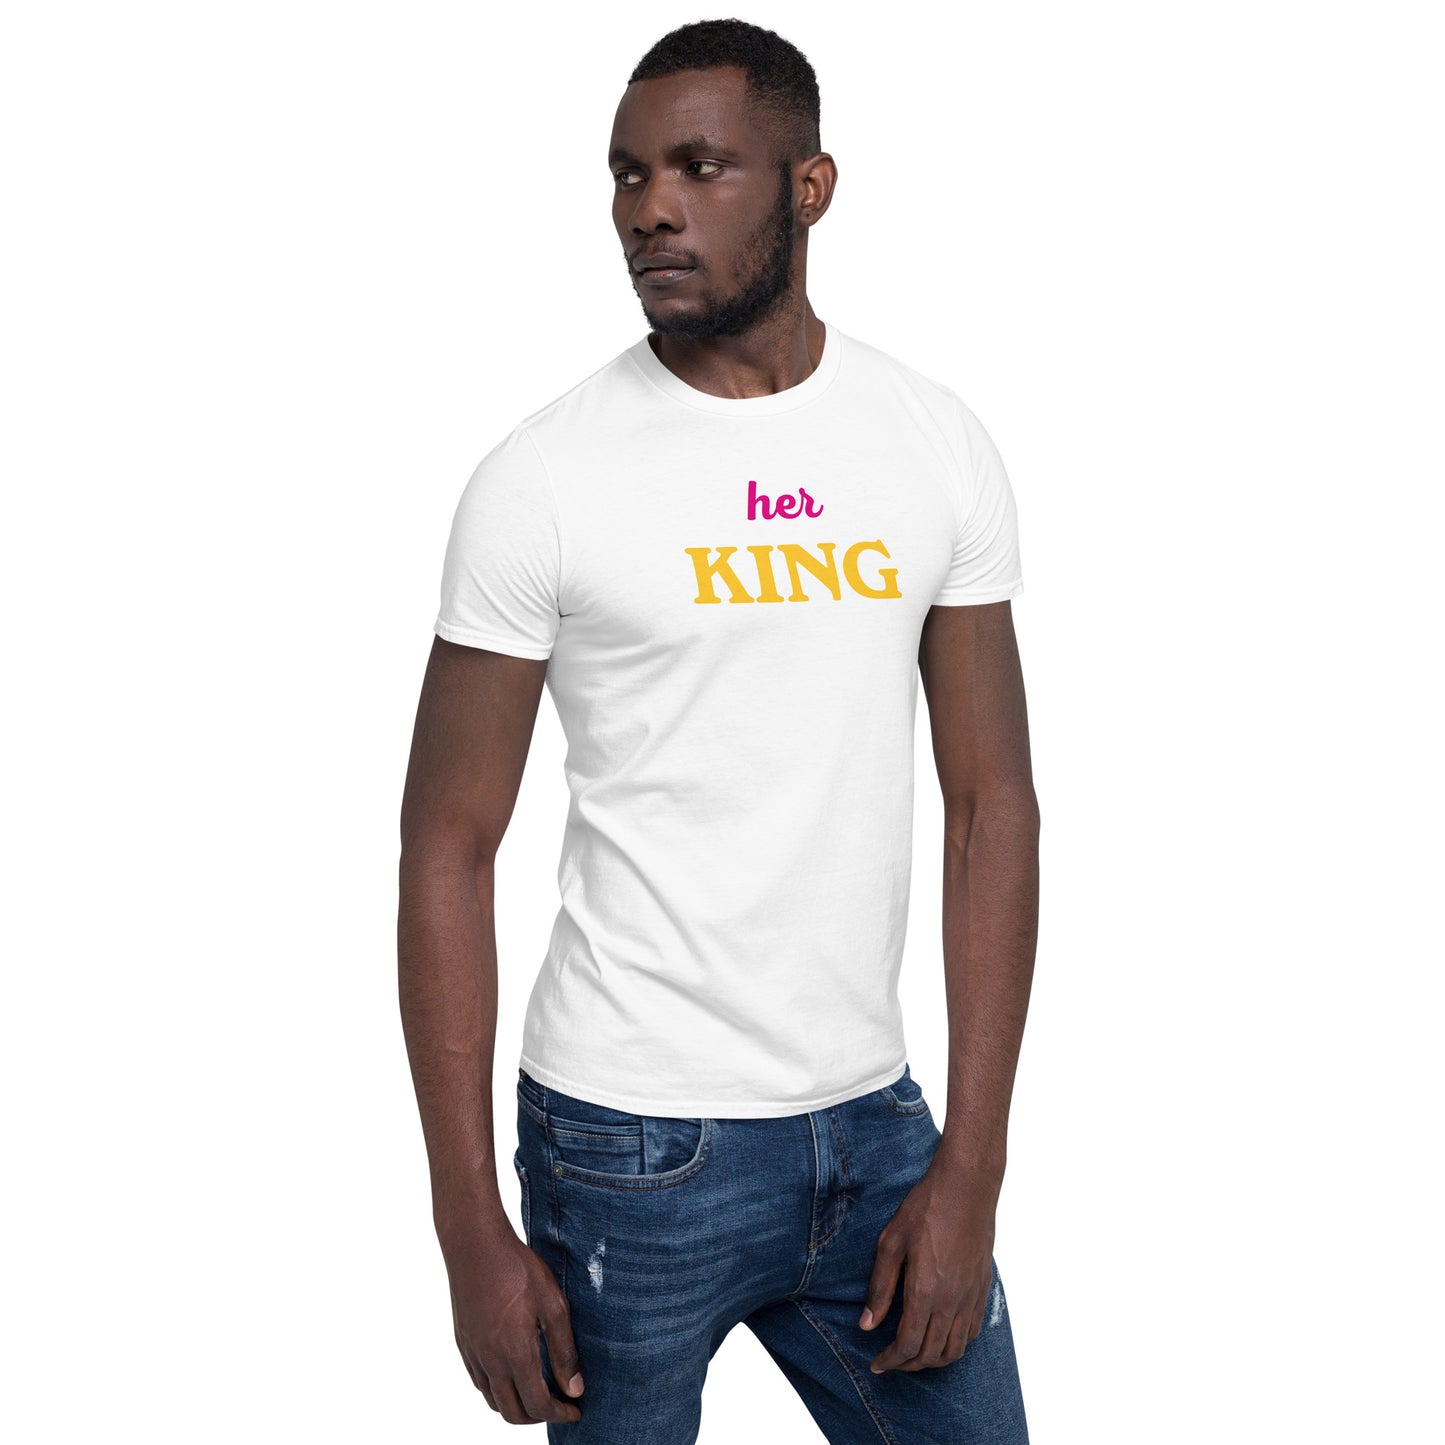 Her King Softstyle T-Shirt white left